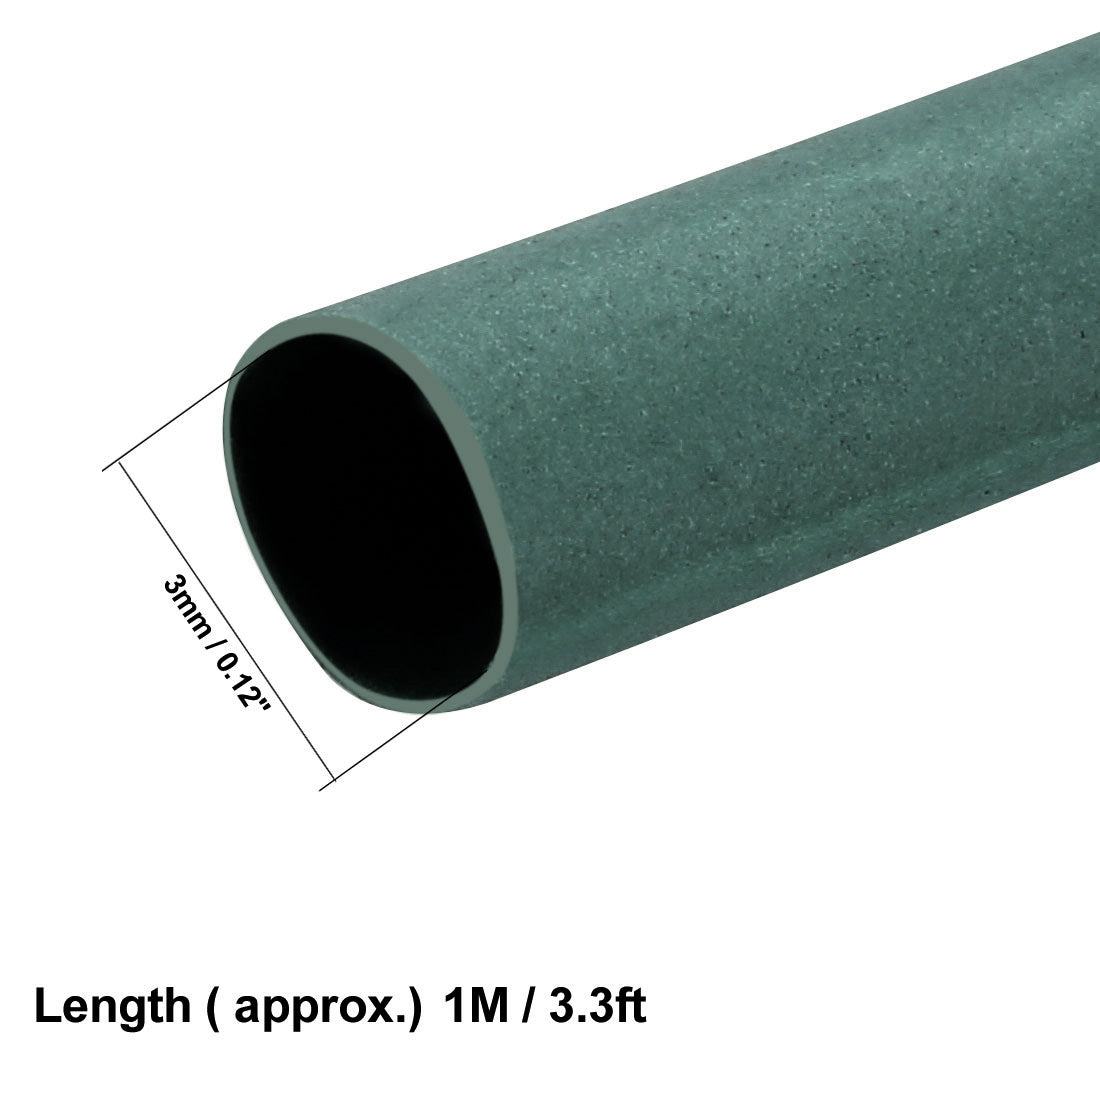 uxcell Uxcell Heat Shrink Tube 2:1 Electrical Insulation Tube Wire Cable Tubing Sleeving Wrap Green 3mm Diameter 1m Long